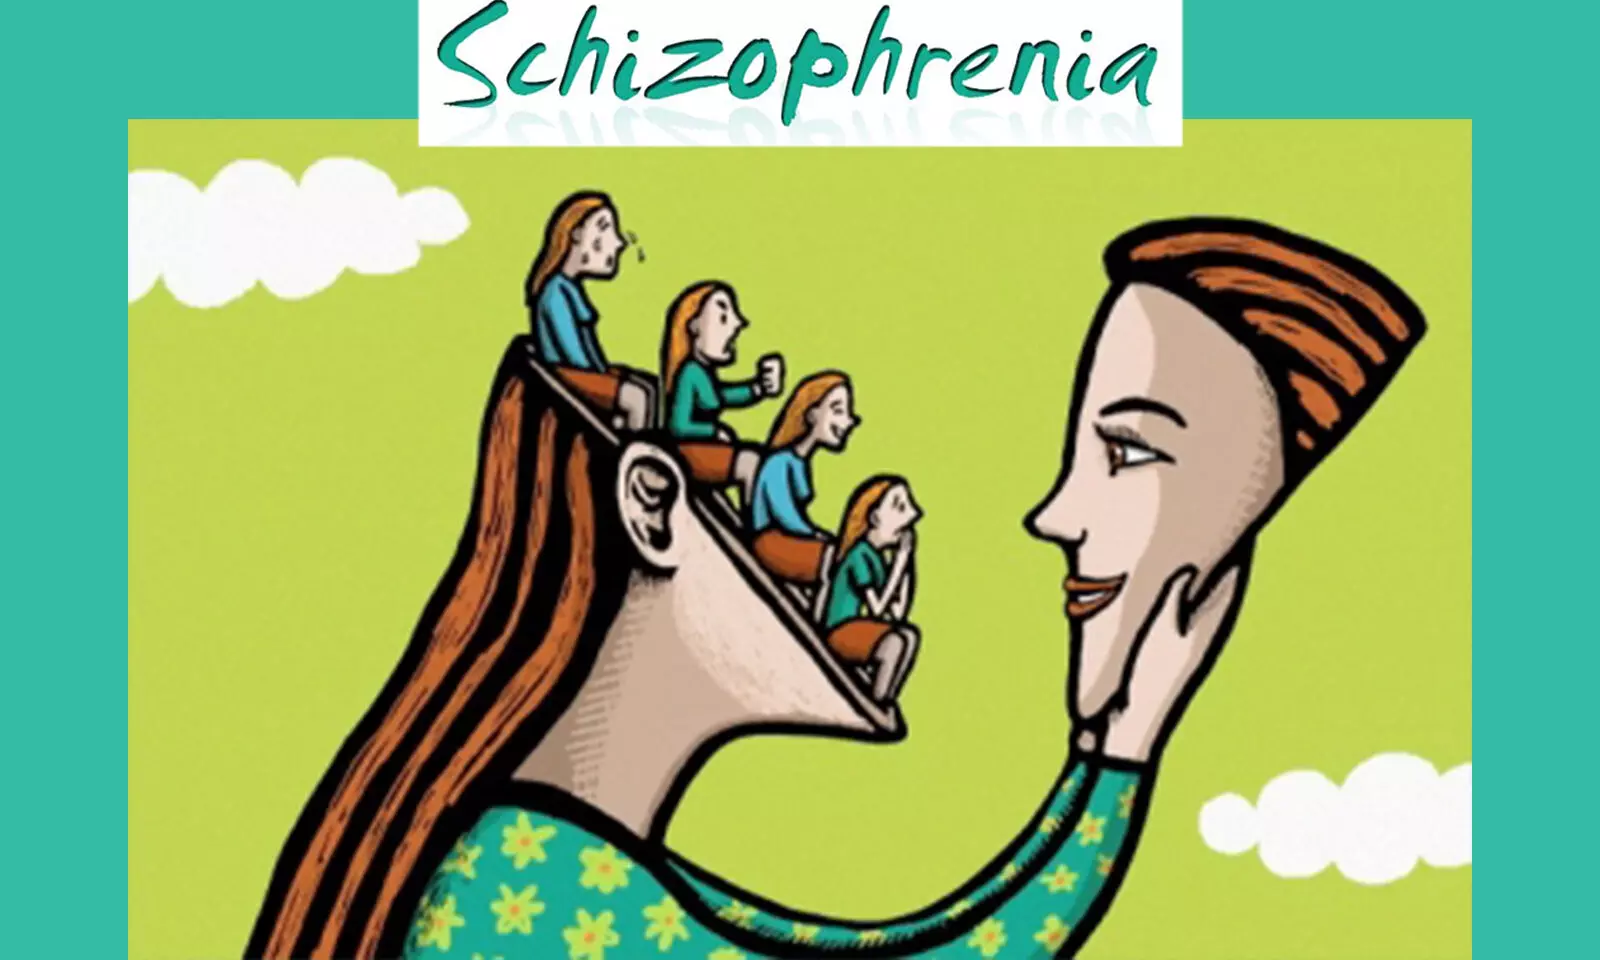 Kids at familial risk of schizophrenia show early neurocognitive deficits: Study